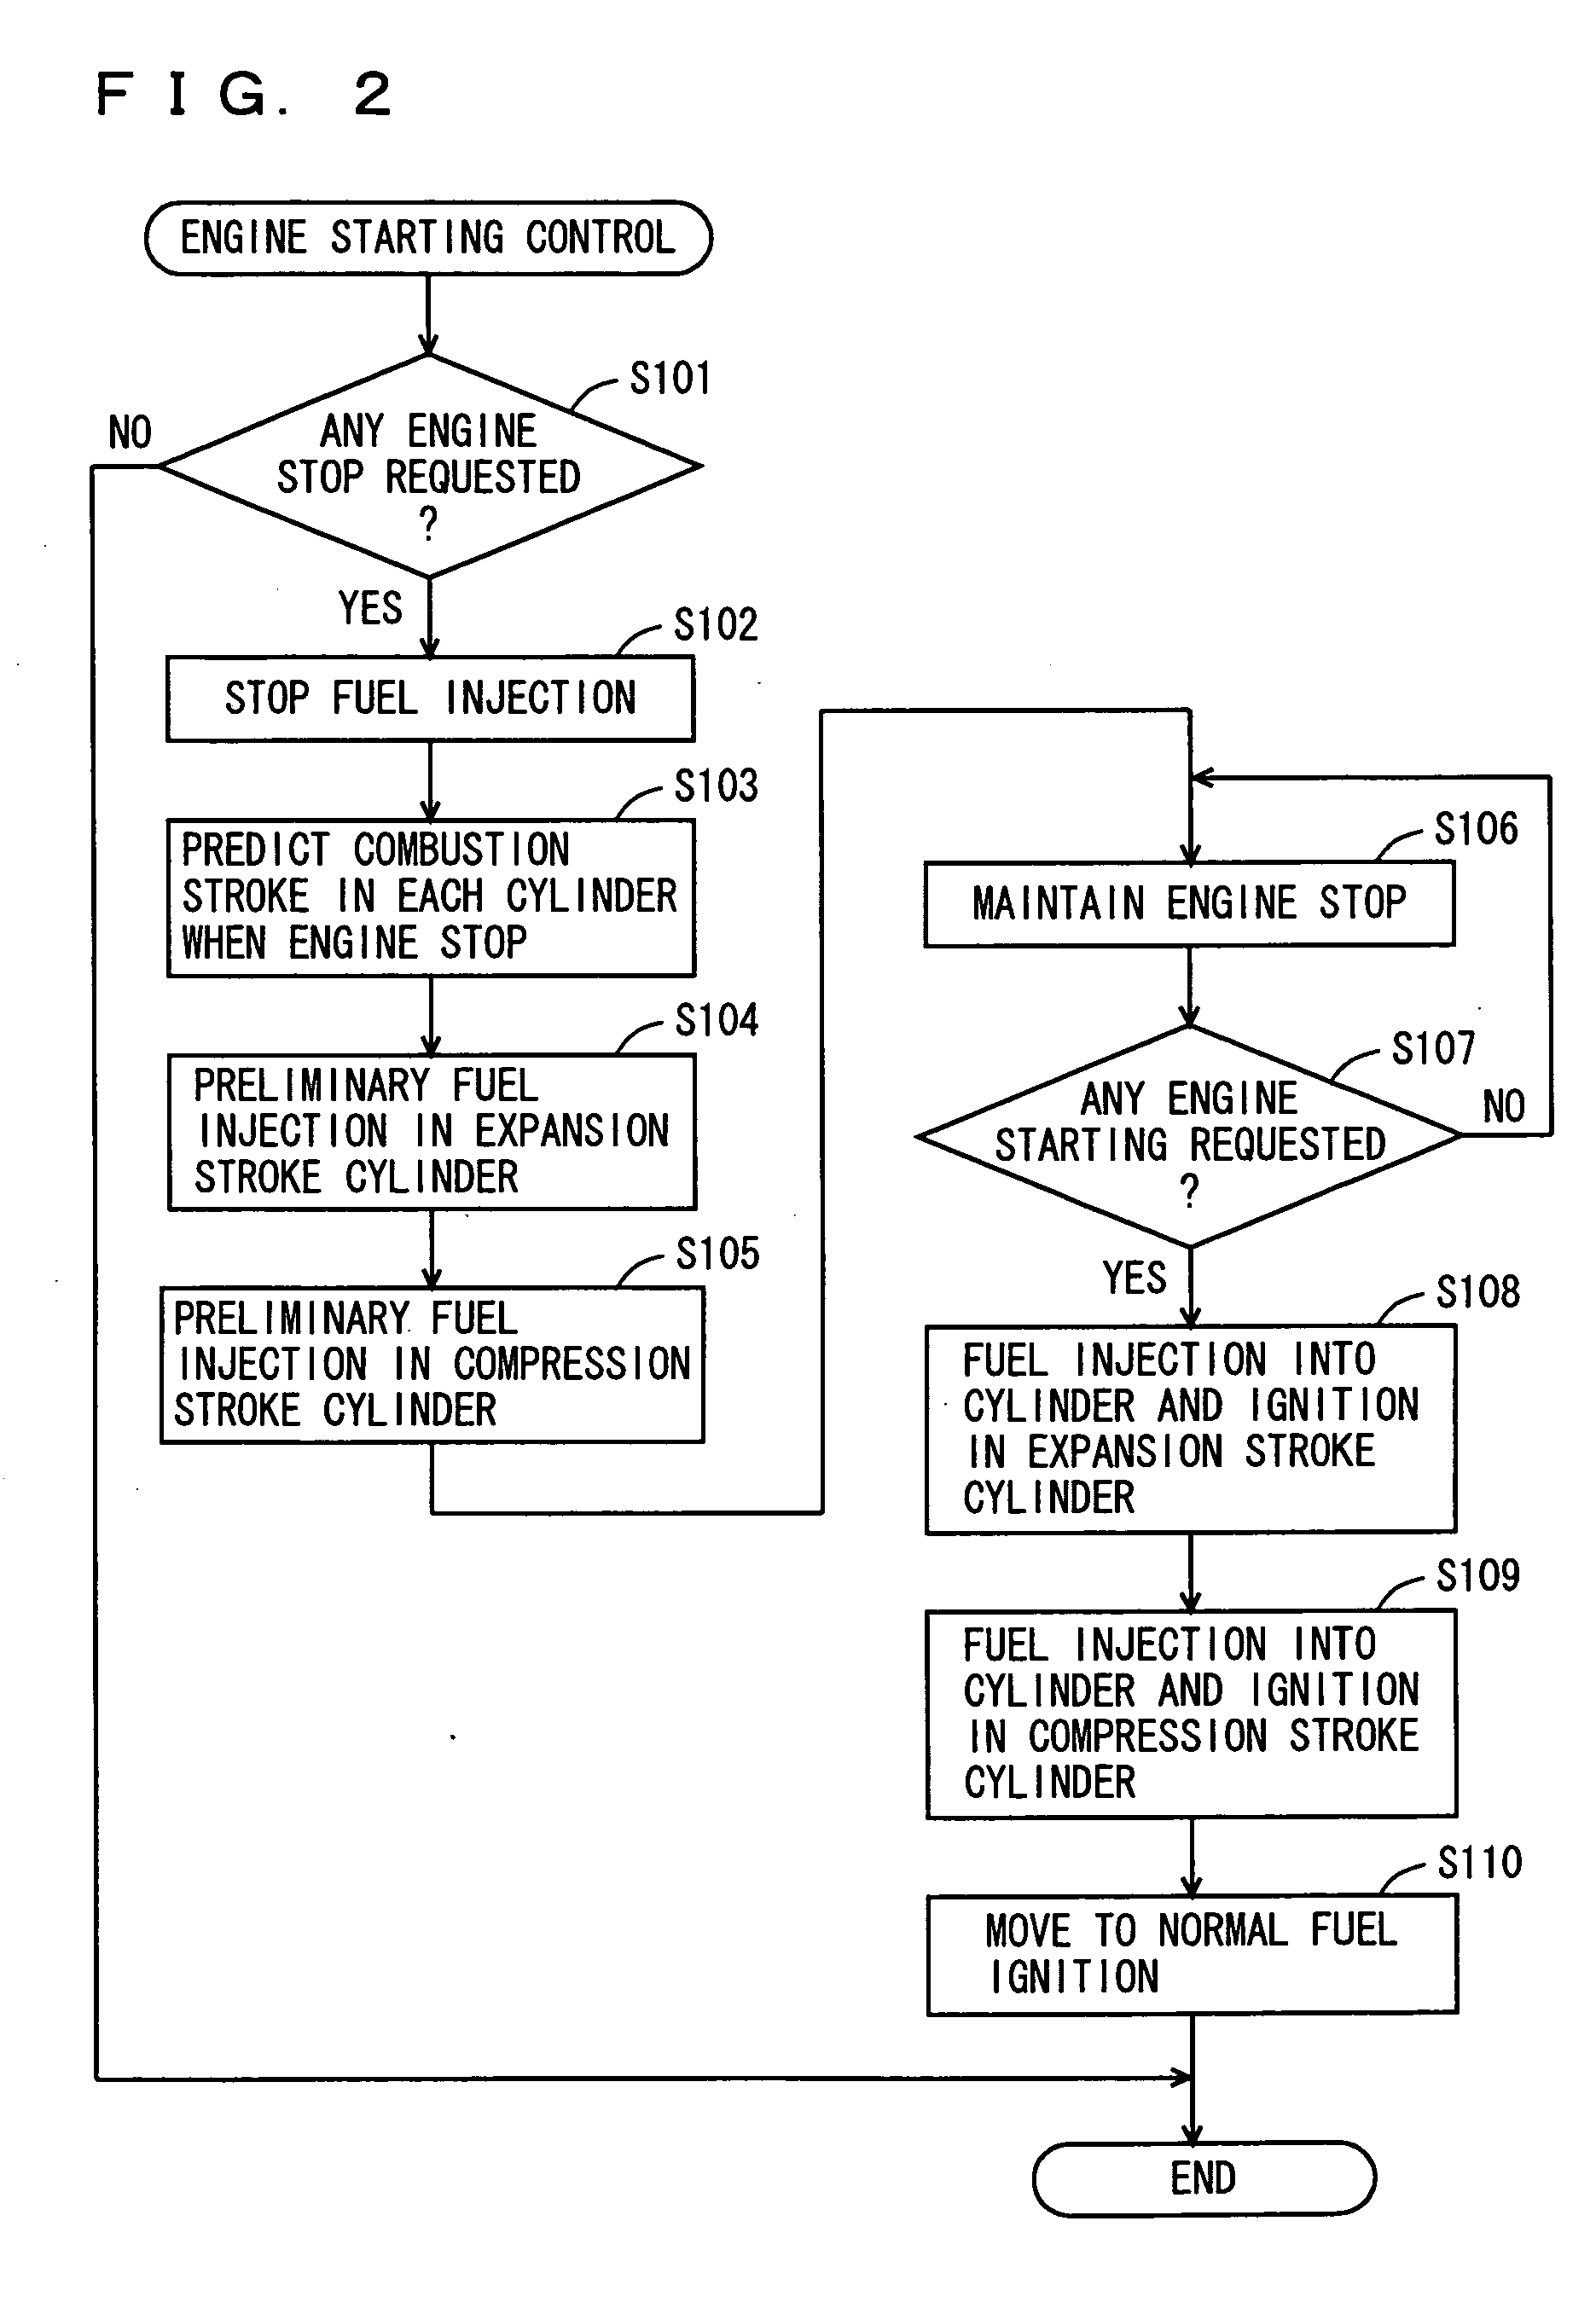 Engine starting control system of internal combustion engine